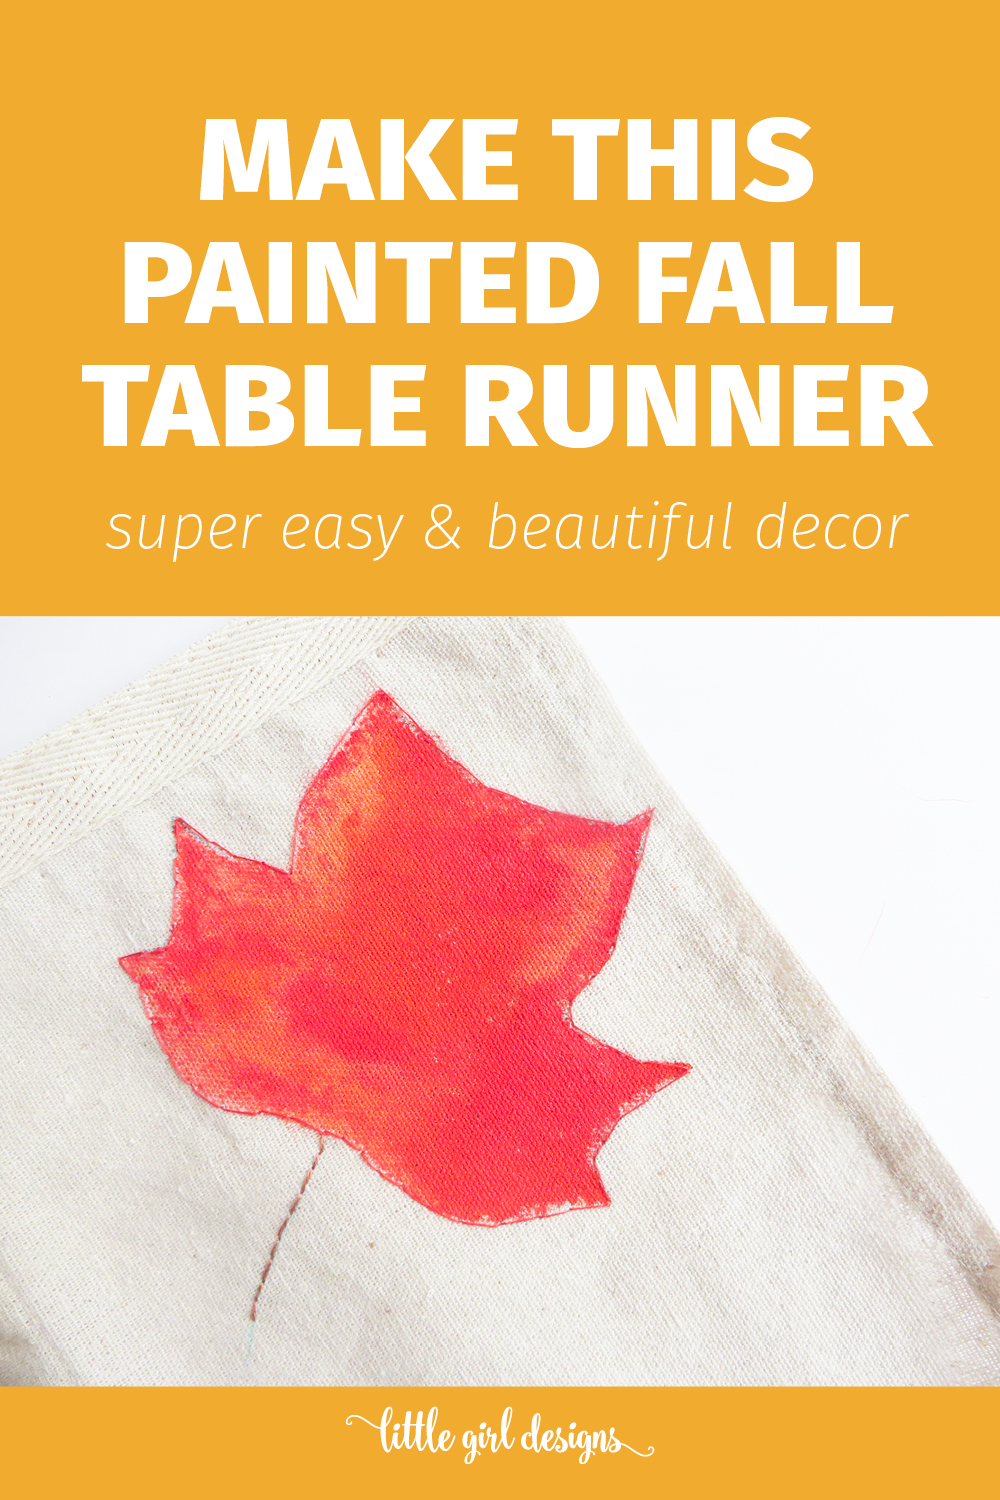 This fall table runner is so pretty and simple to make! Turn on a movie, paint and stitch away, and you'll have a lovely table runner for fall.